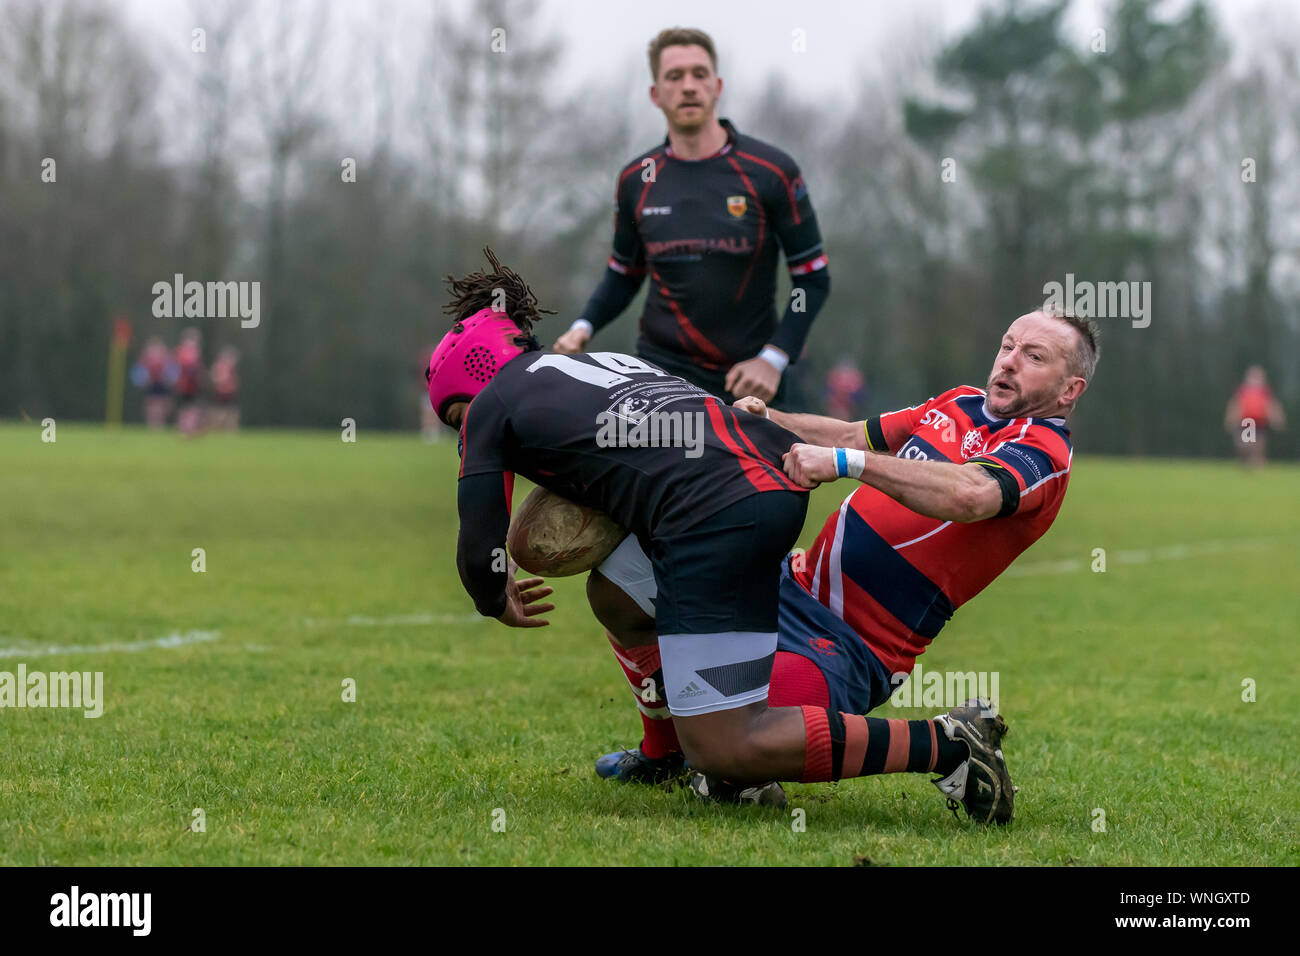 Adult male rugby union tackle, player desperately grabs onto the shorts of player with the ball. Stock Photo